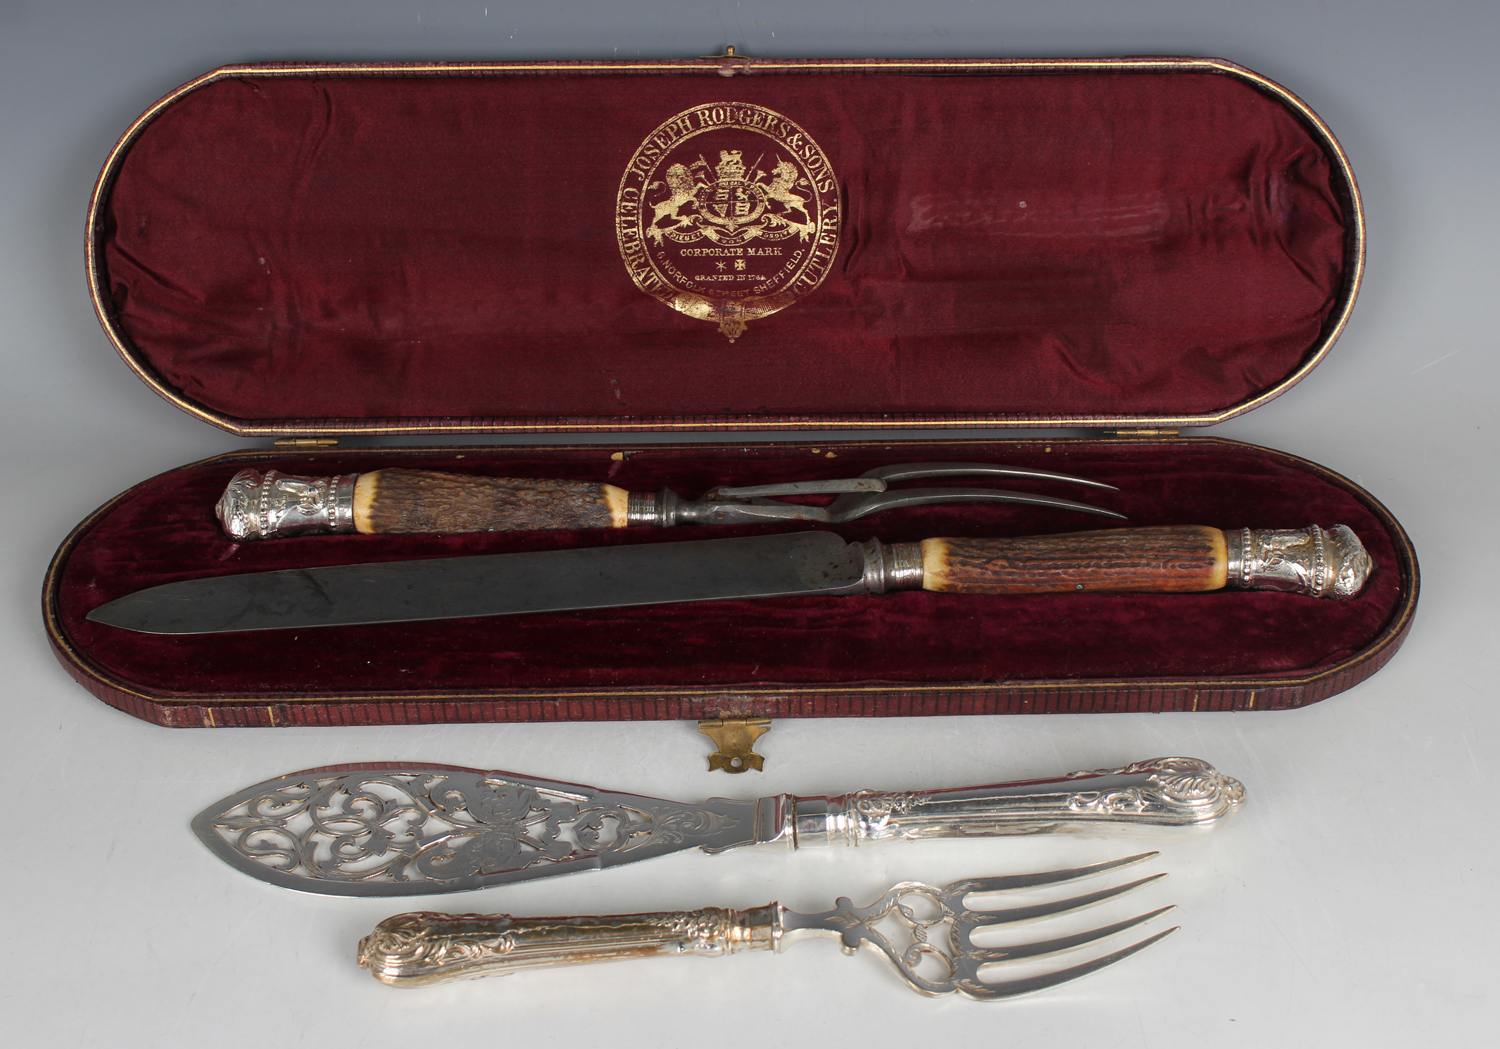 A silver mounted stag antler handled two-piece carving knife and fork set with steel blade and